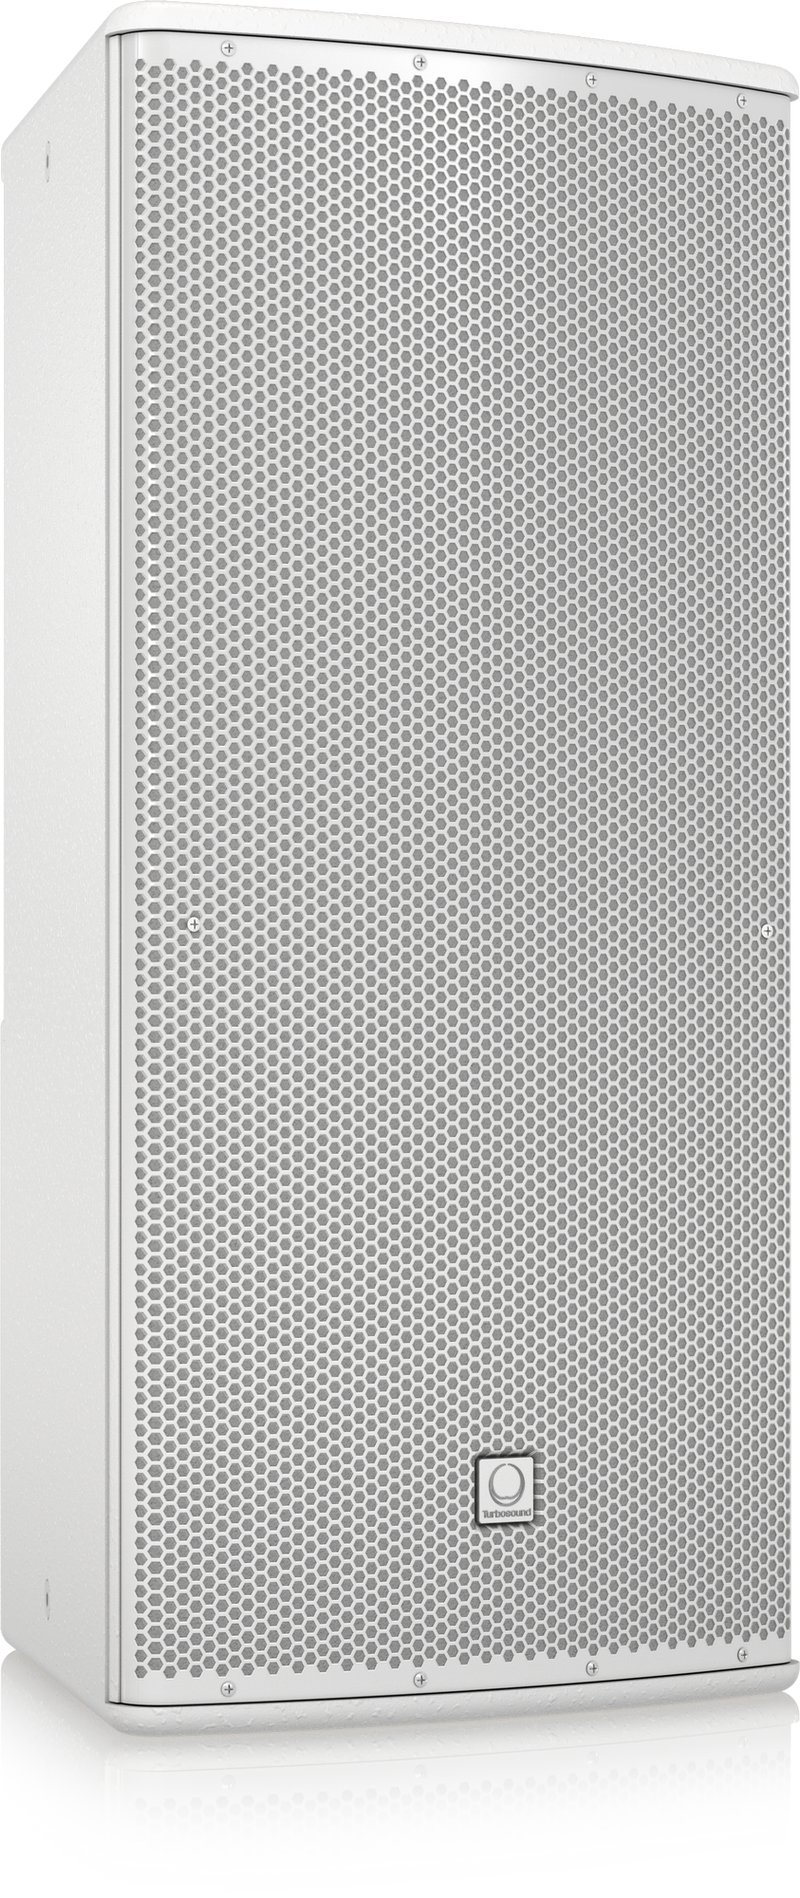 Turbosound TCS122/94 Arrayable 2 Way 12" Full Range Loudspeaker with Dendritic Waveguide for Installation Applications - DEMO